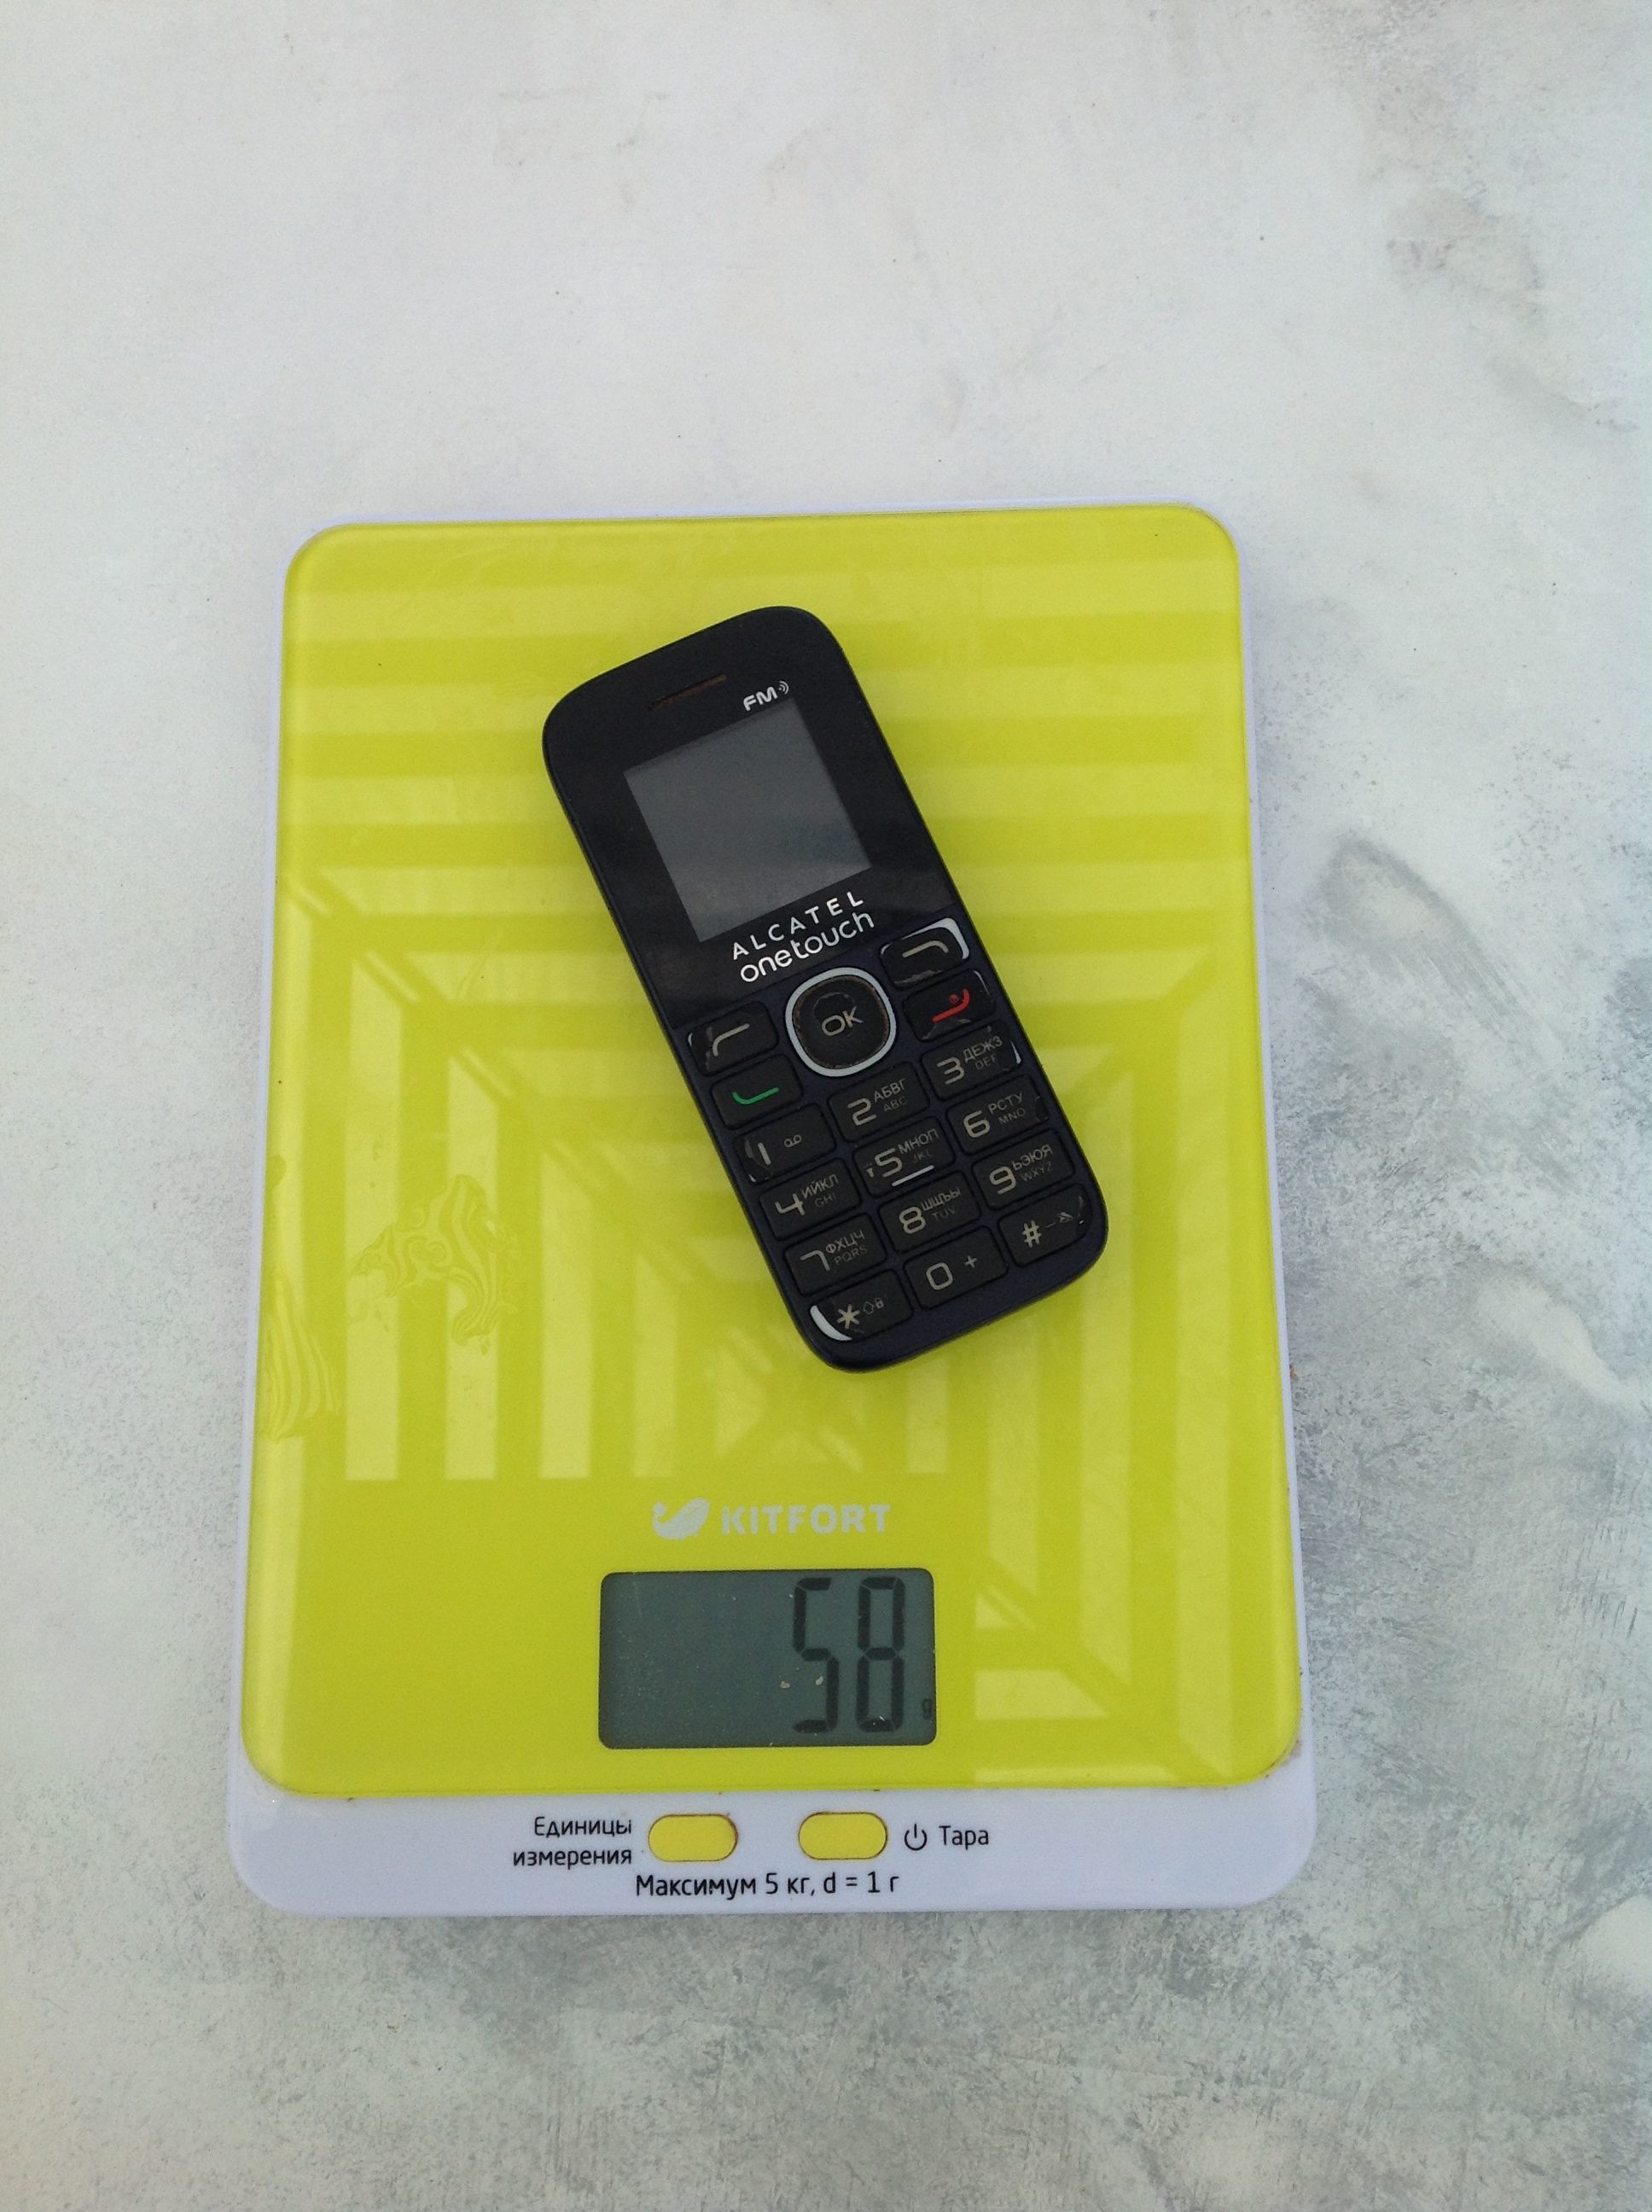 How much does the Alcatel One Touch feature phone weigh?